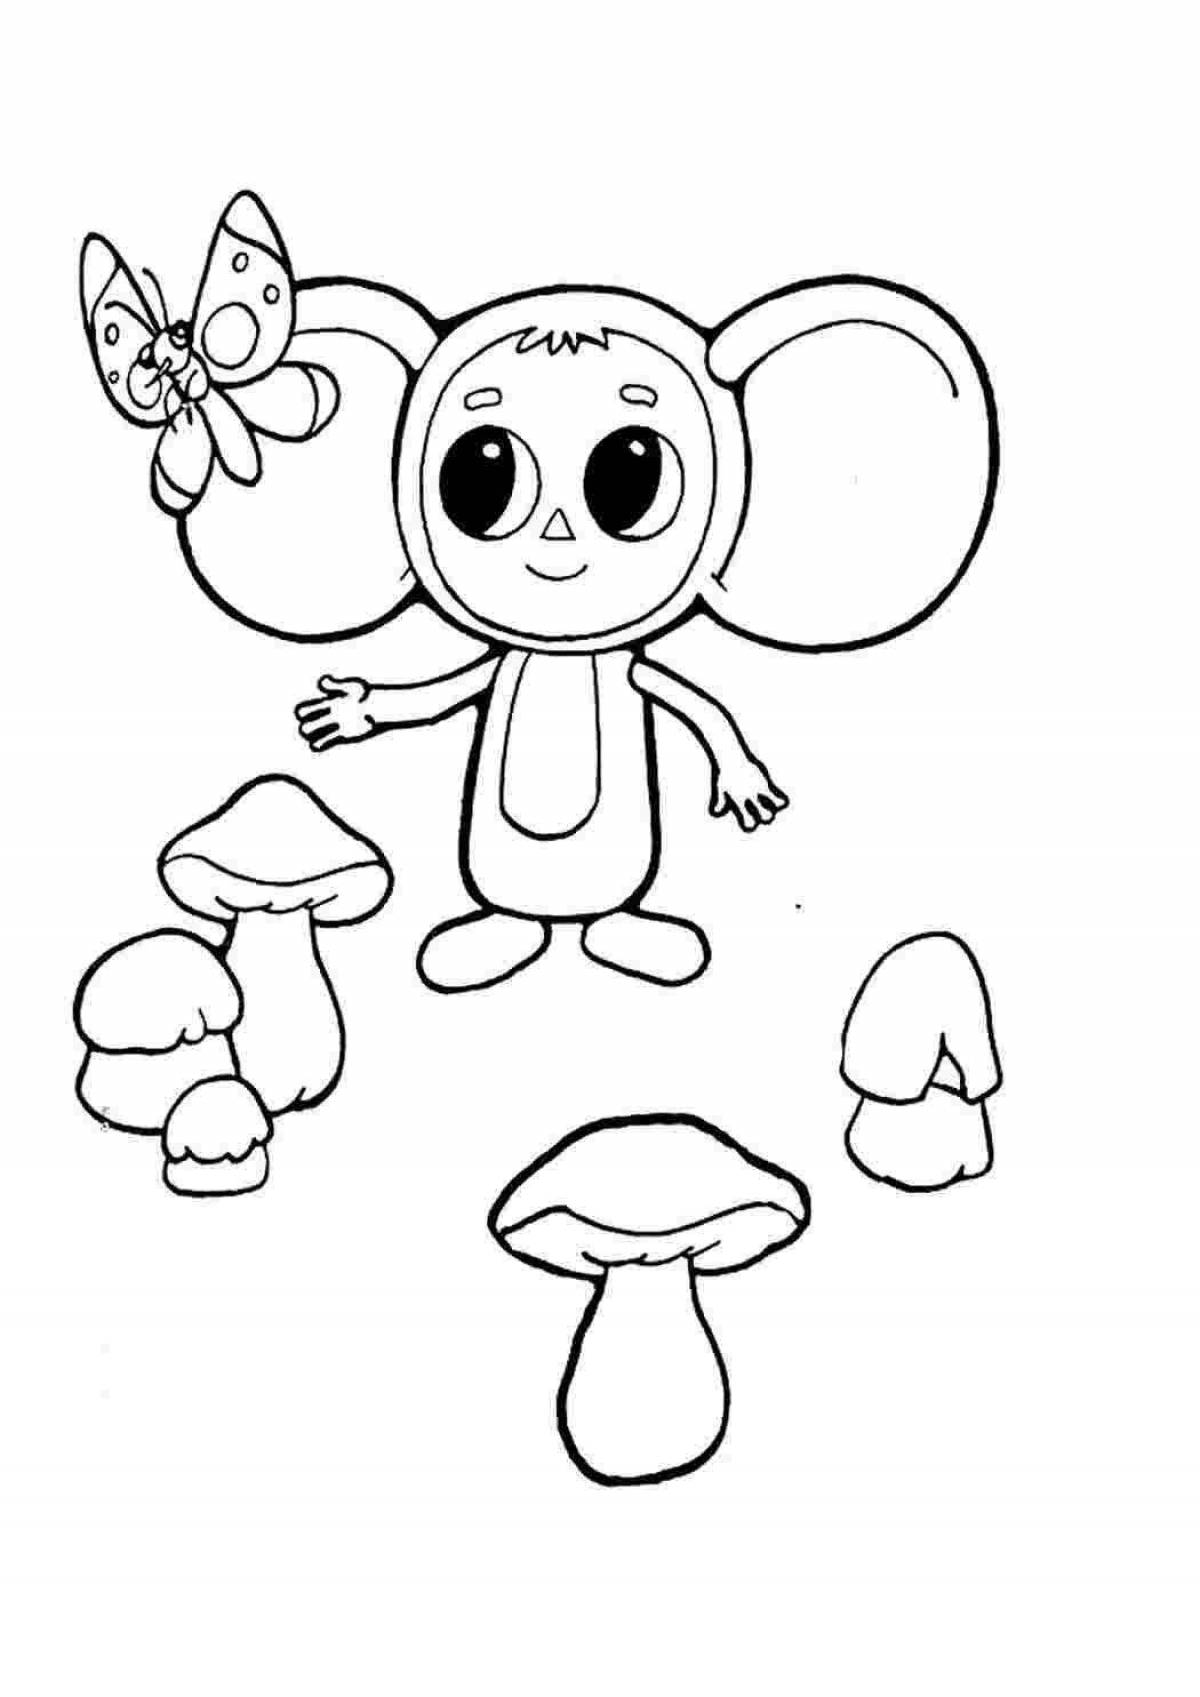 Attractive cheburashka by numbers coloring